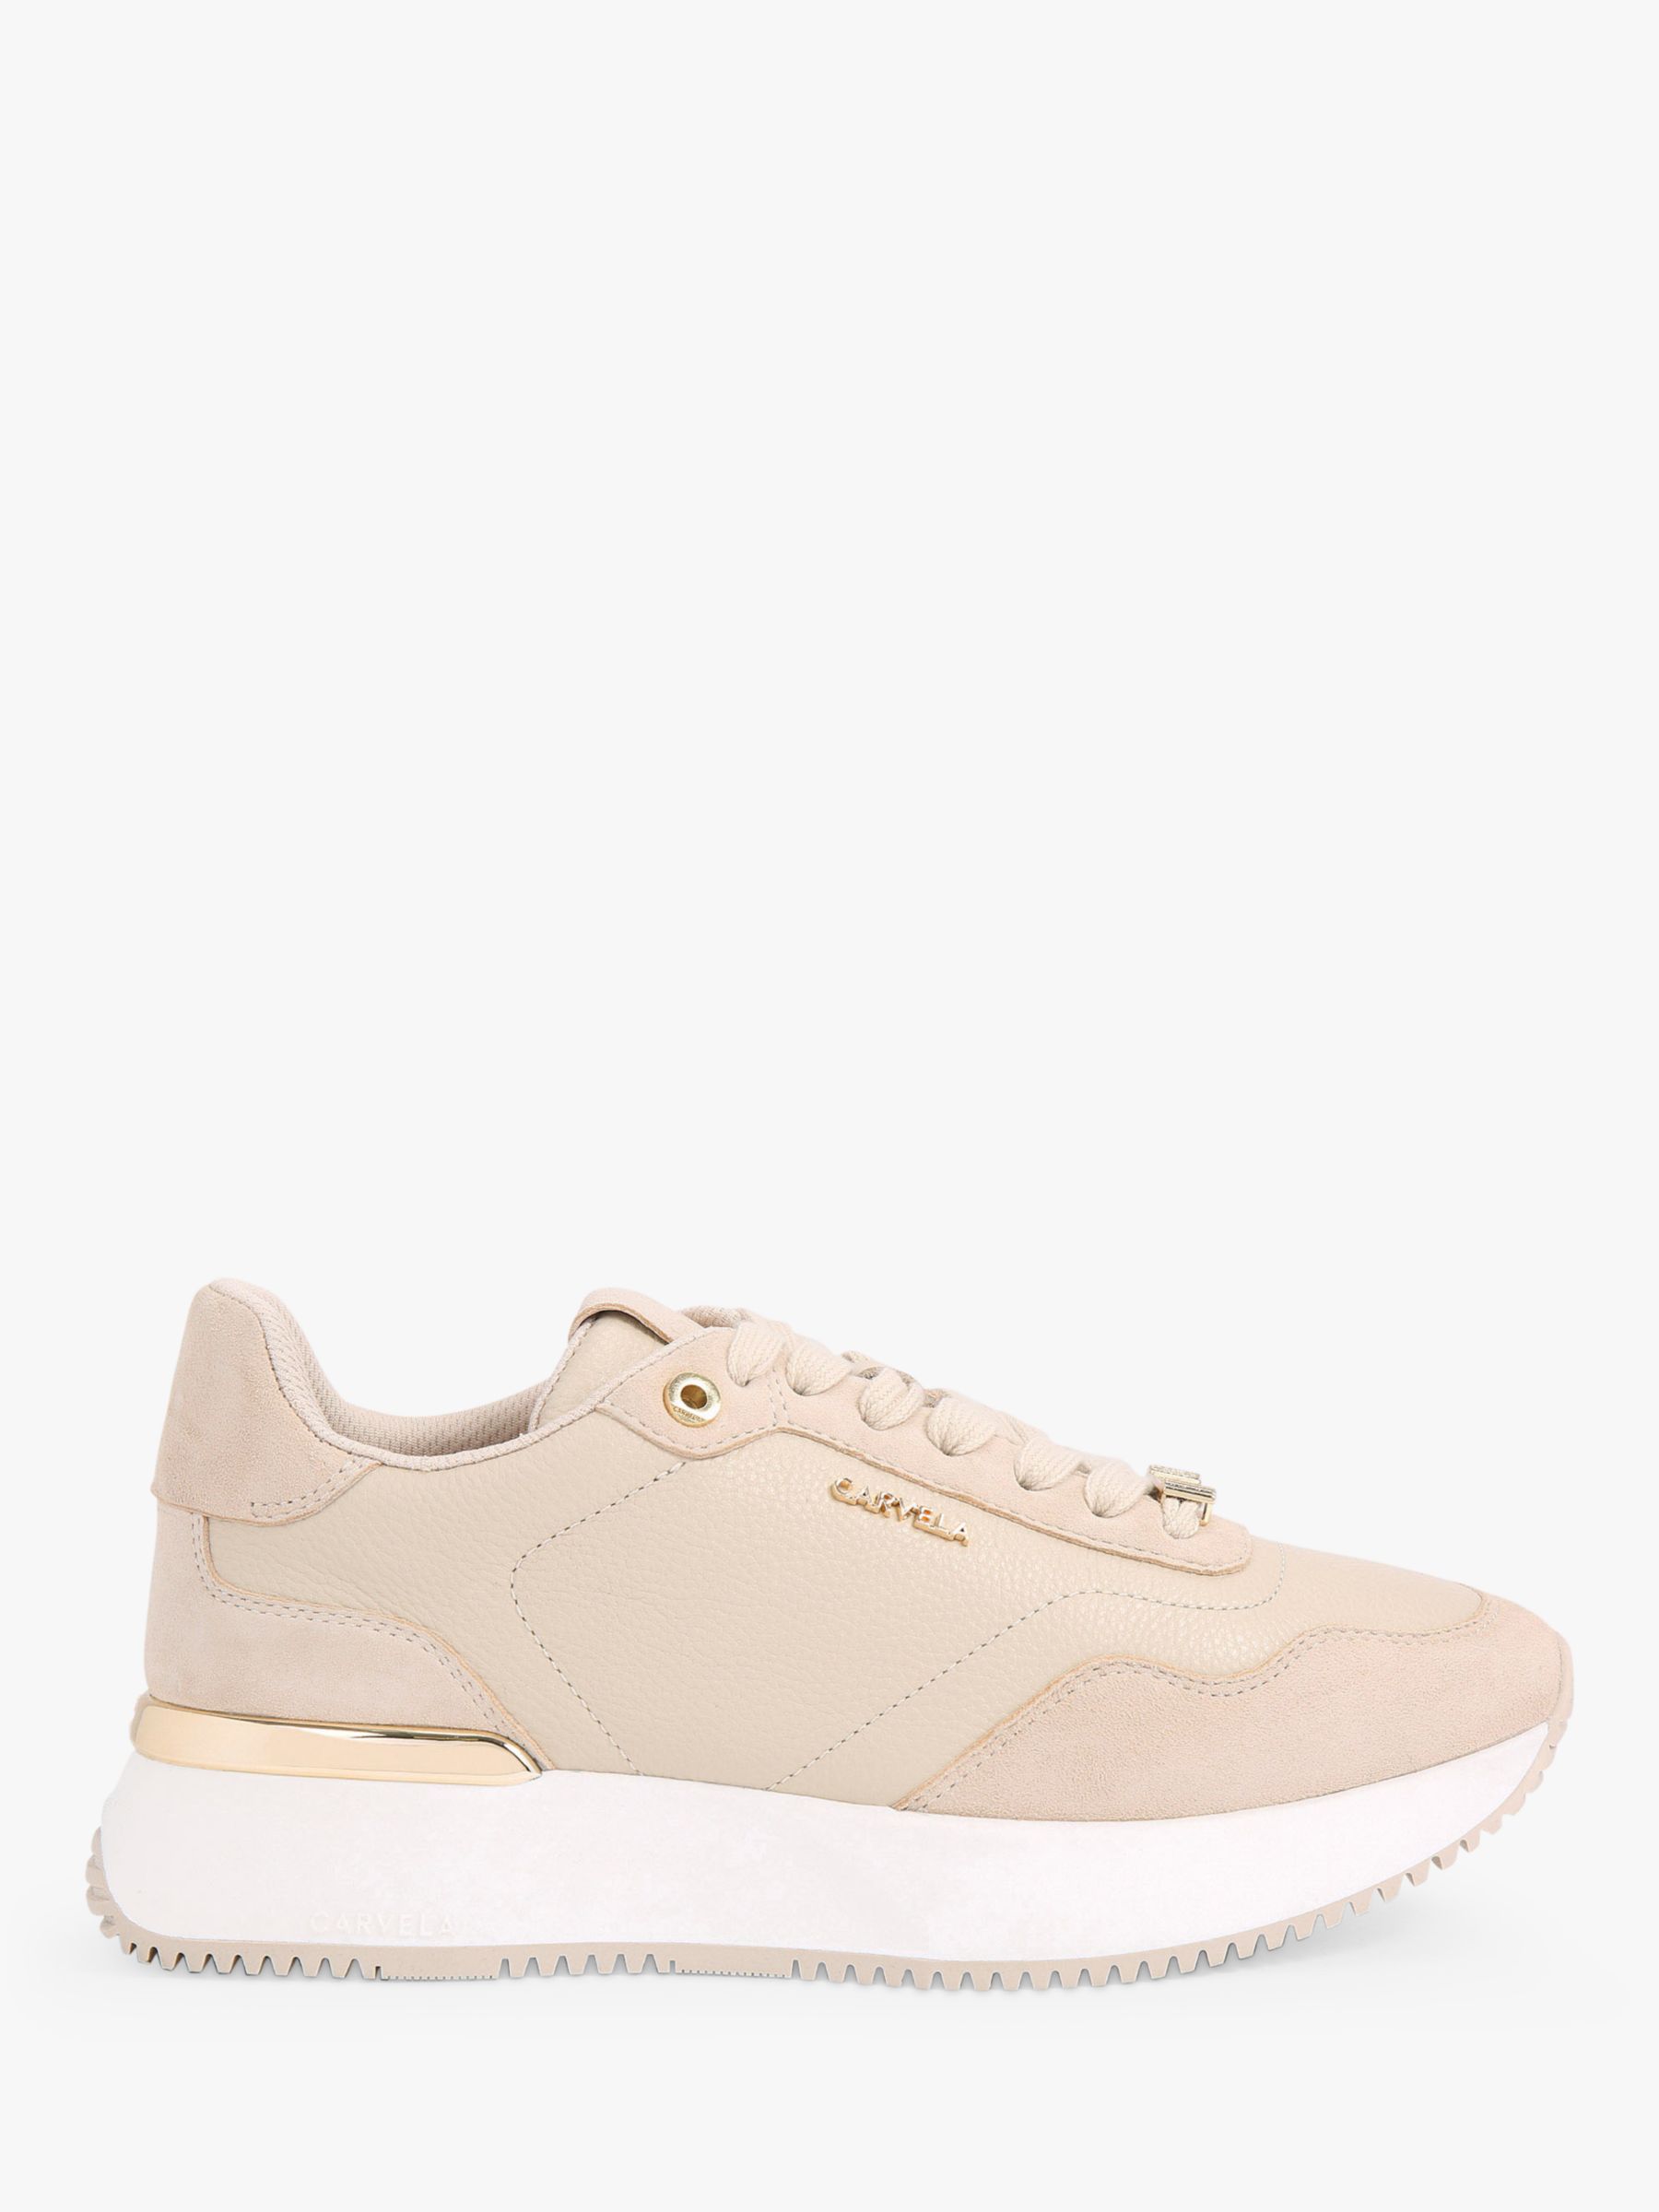 Carvela Flare Leather Trainers, Natural Beige, 3